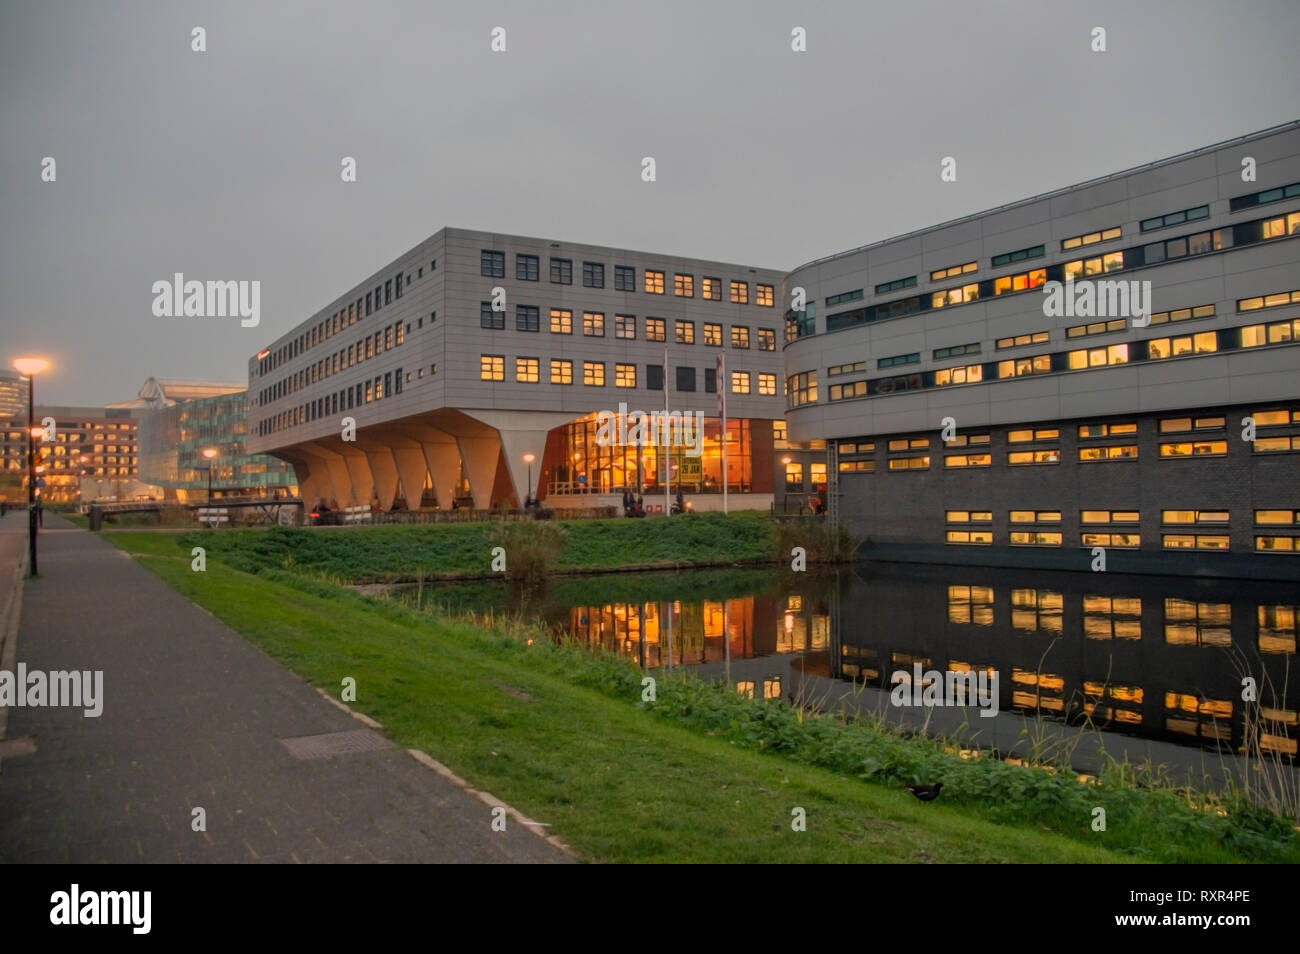 ROC C Building At Amsterdam The Netherlands 2018 Stock Photo